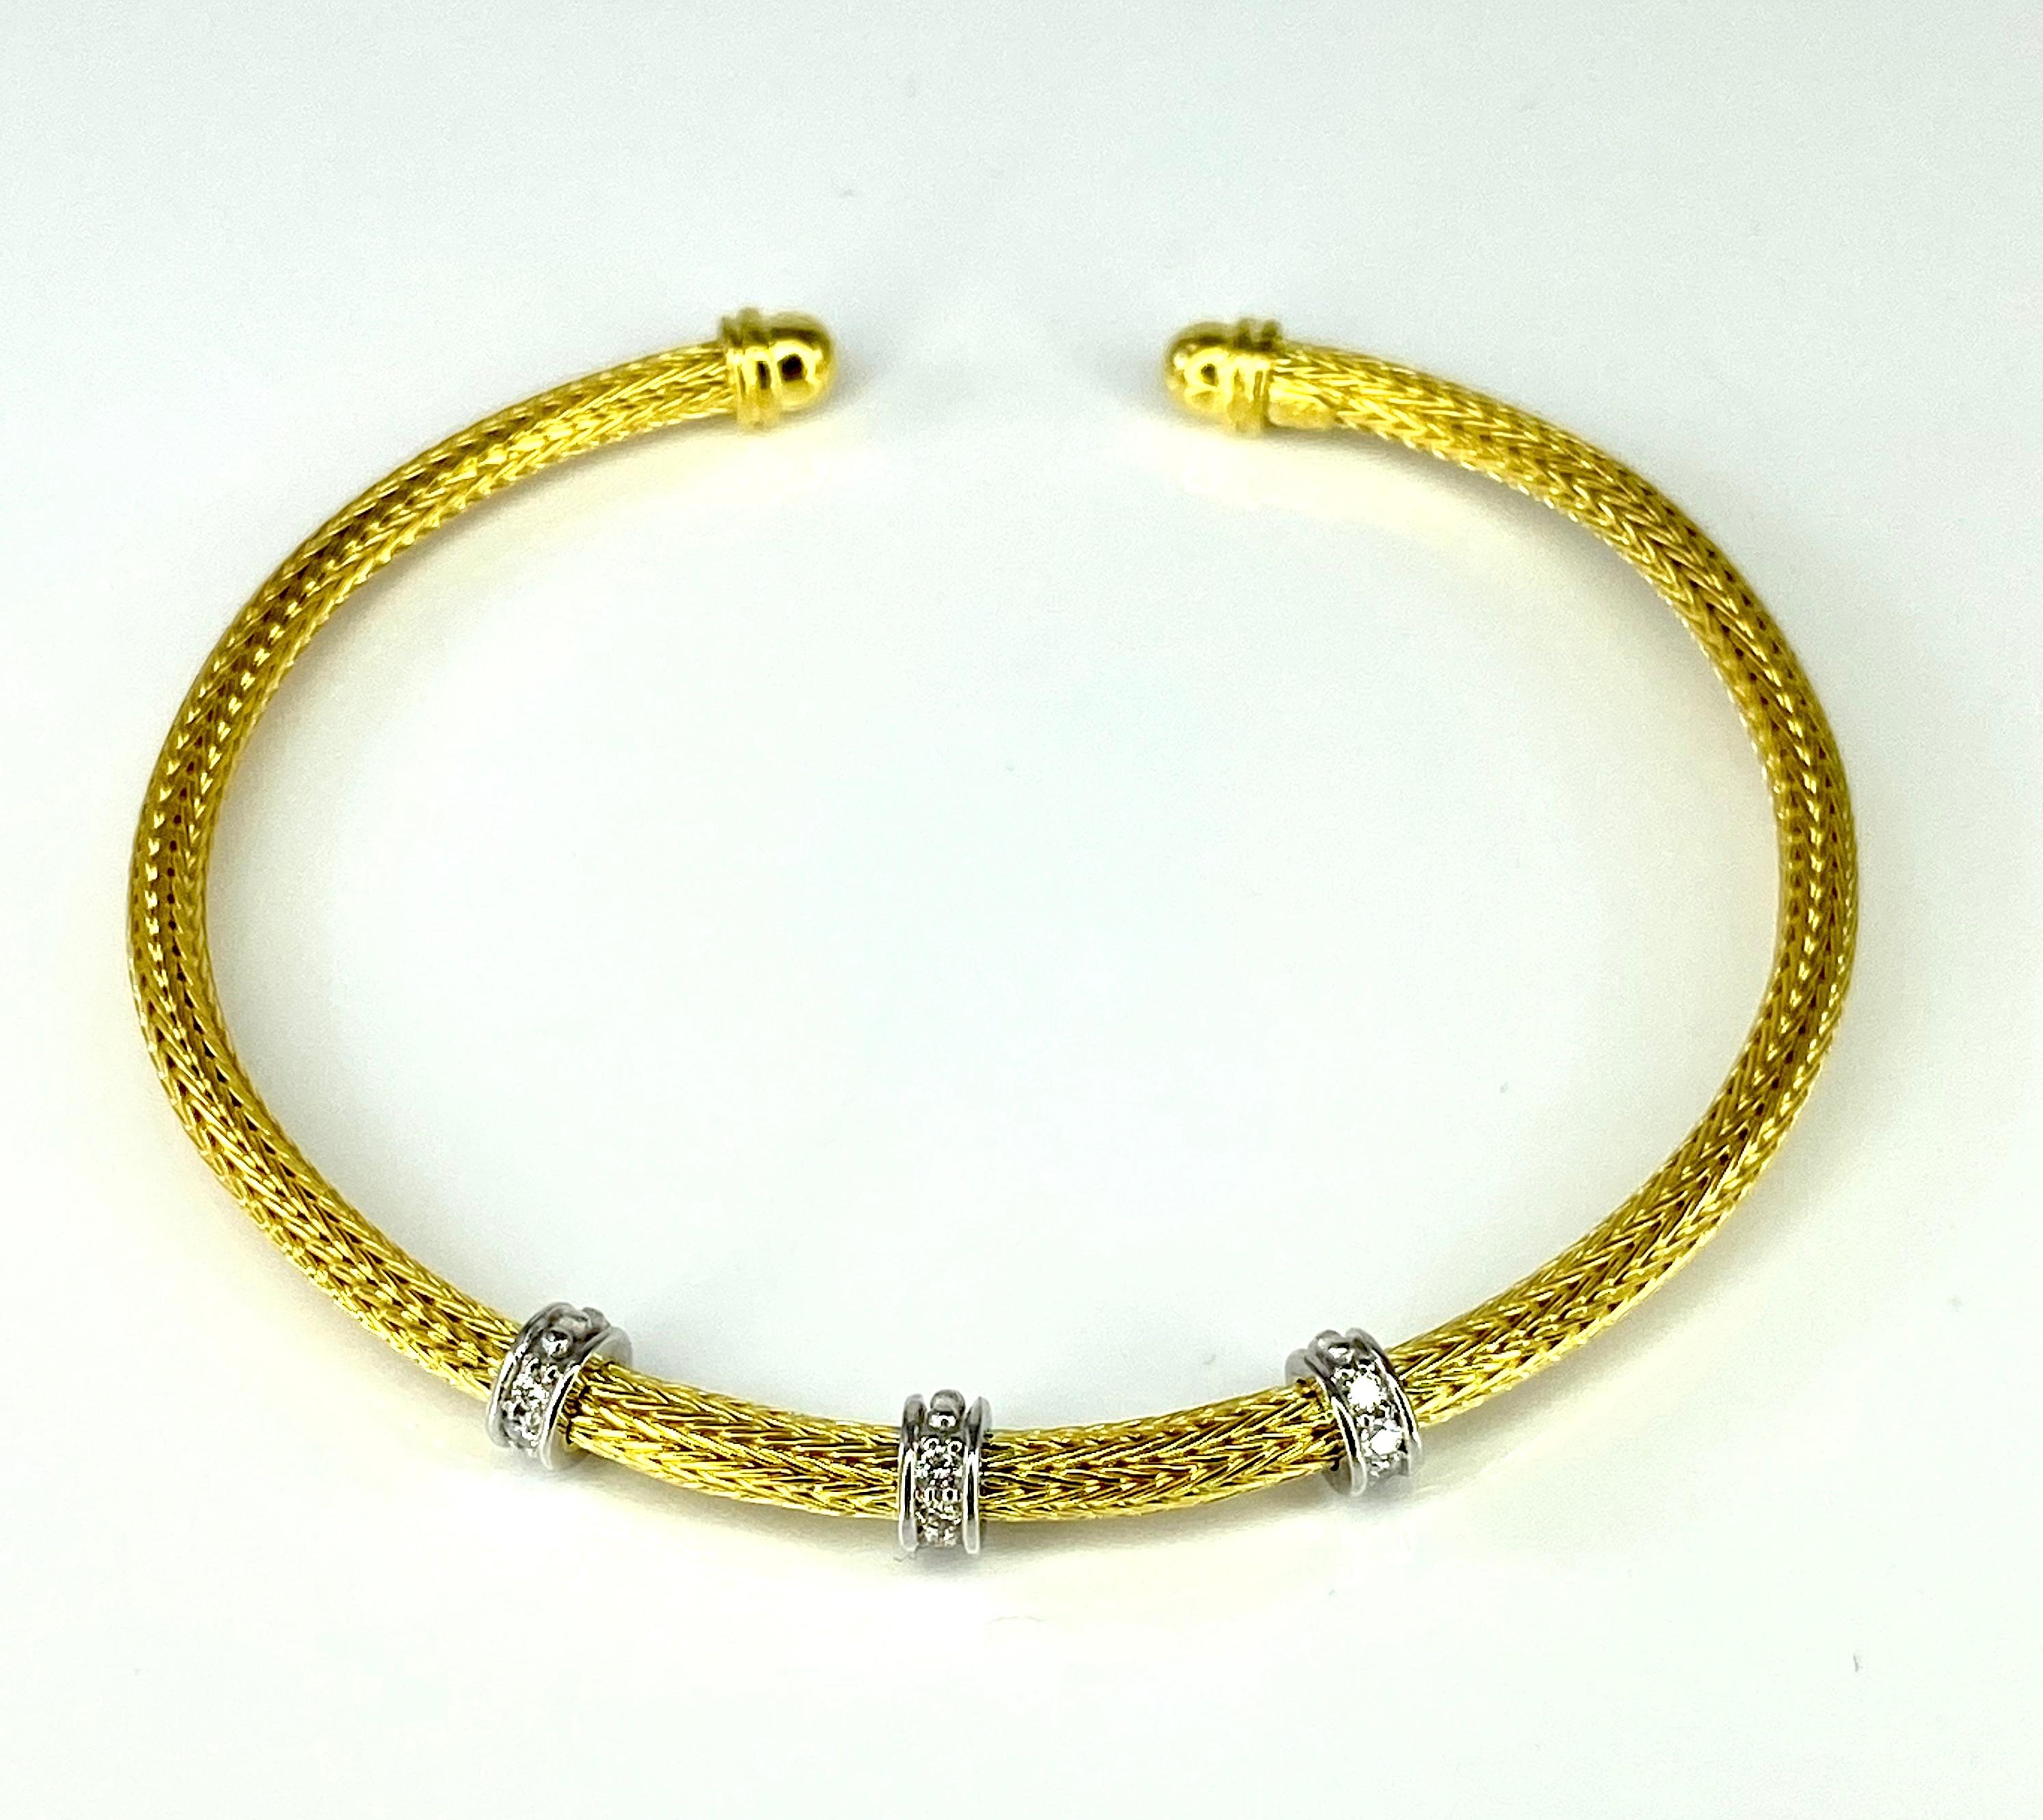 This is S.Georgios designer rope bracelet knitted from 18 Karat yellow gold threds in our workshop in Greece. This all custom-made flexible bangle bracelet is decorated with white gold and white brilliant cut diamonds with a total weight of 0.18